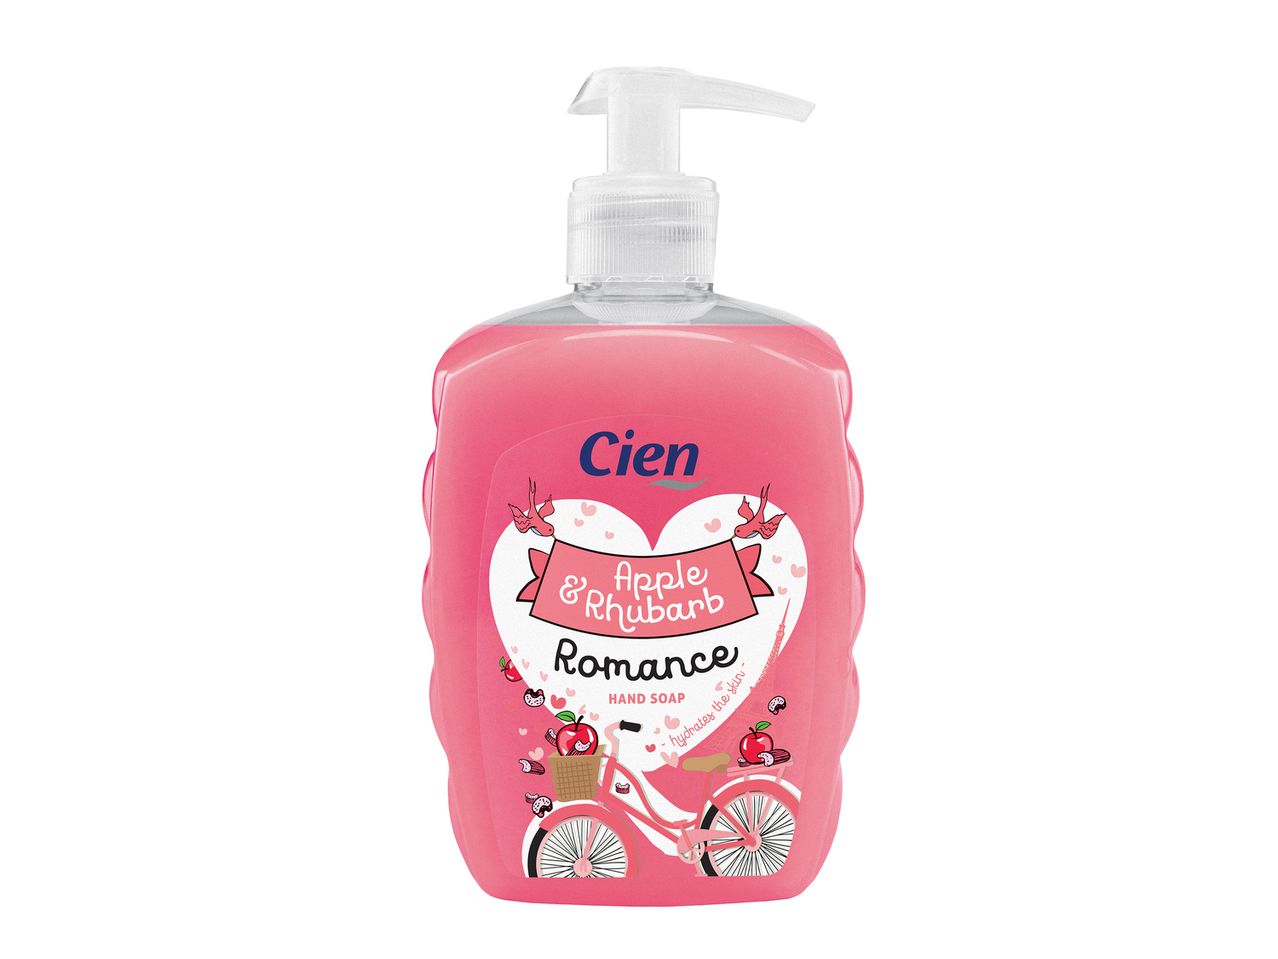 Go to full screen view: Cien Hand Soap - Image 2